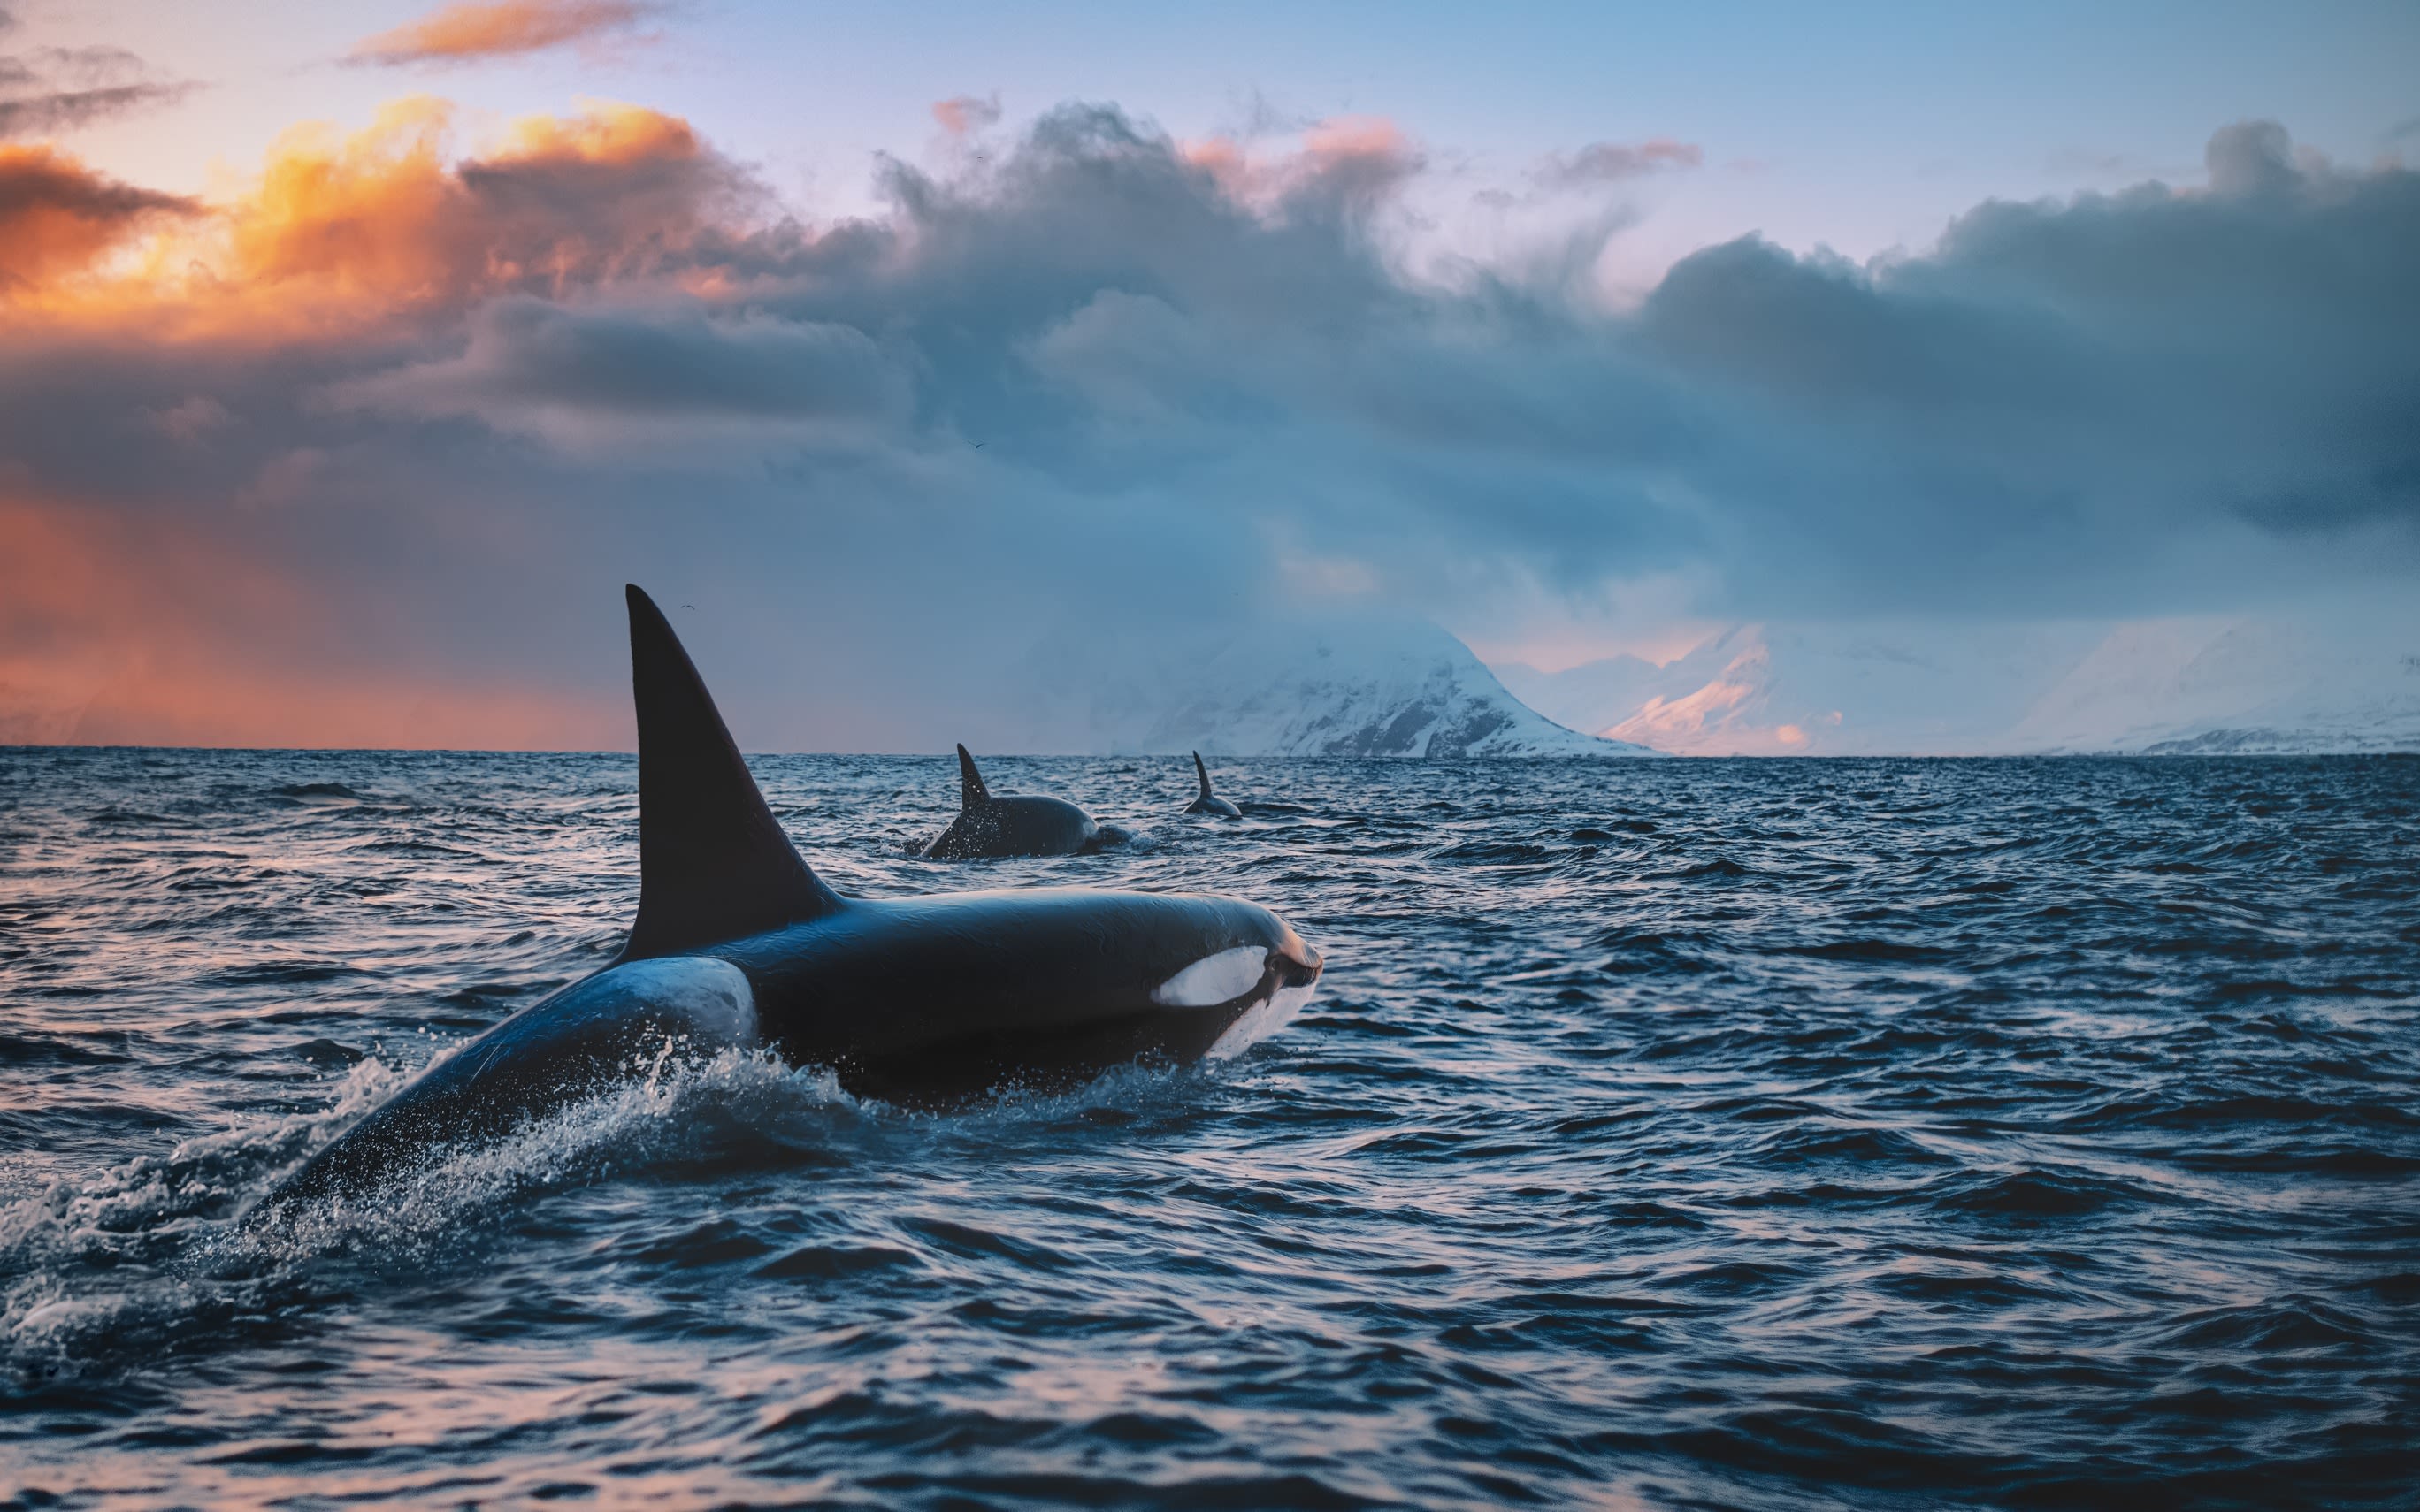 An image of an orca whale in the ocean